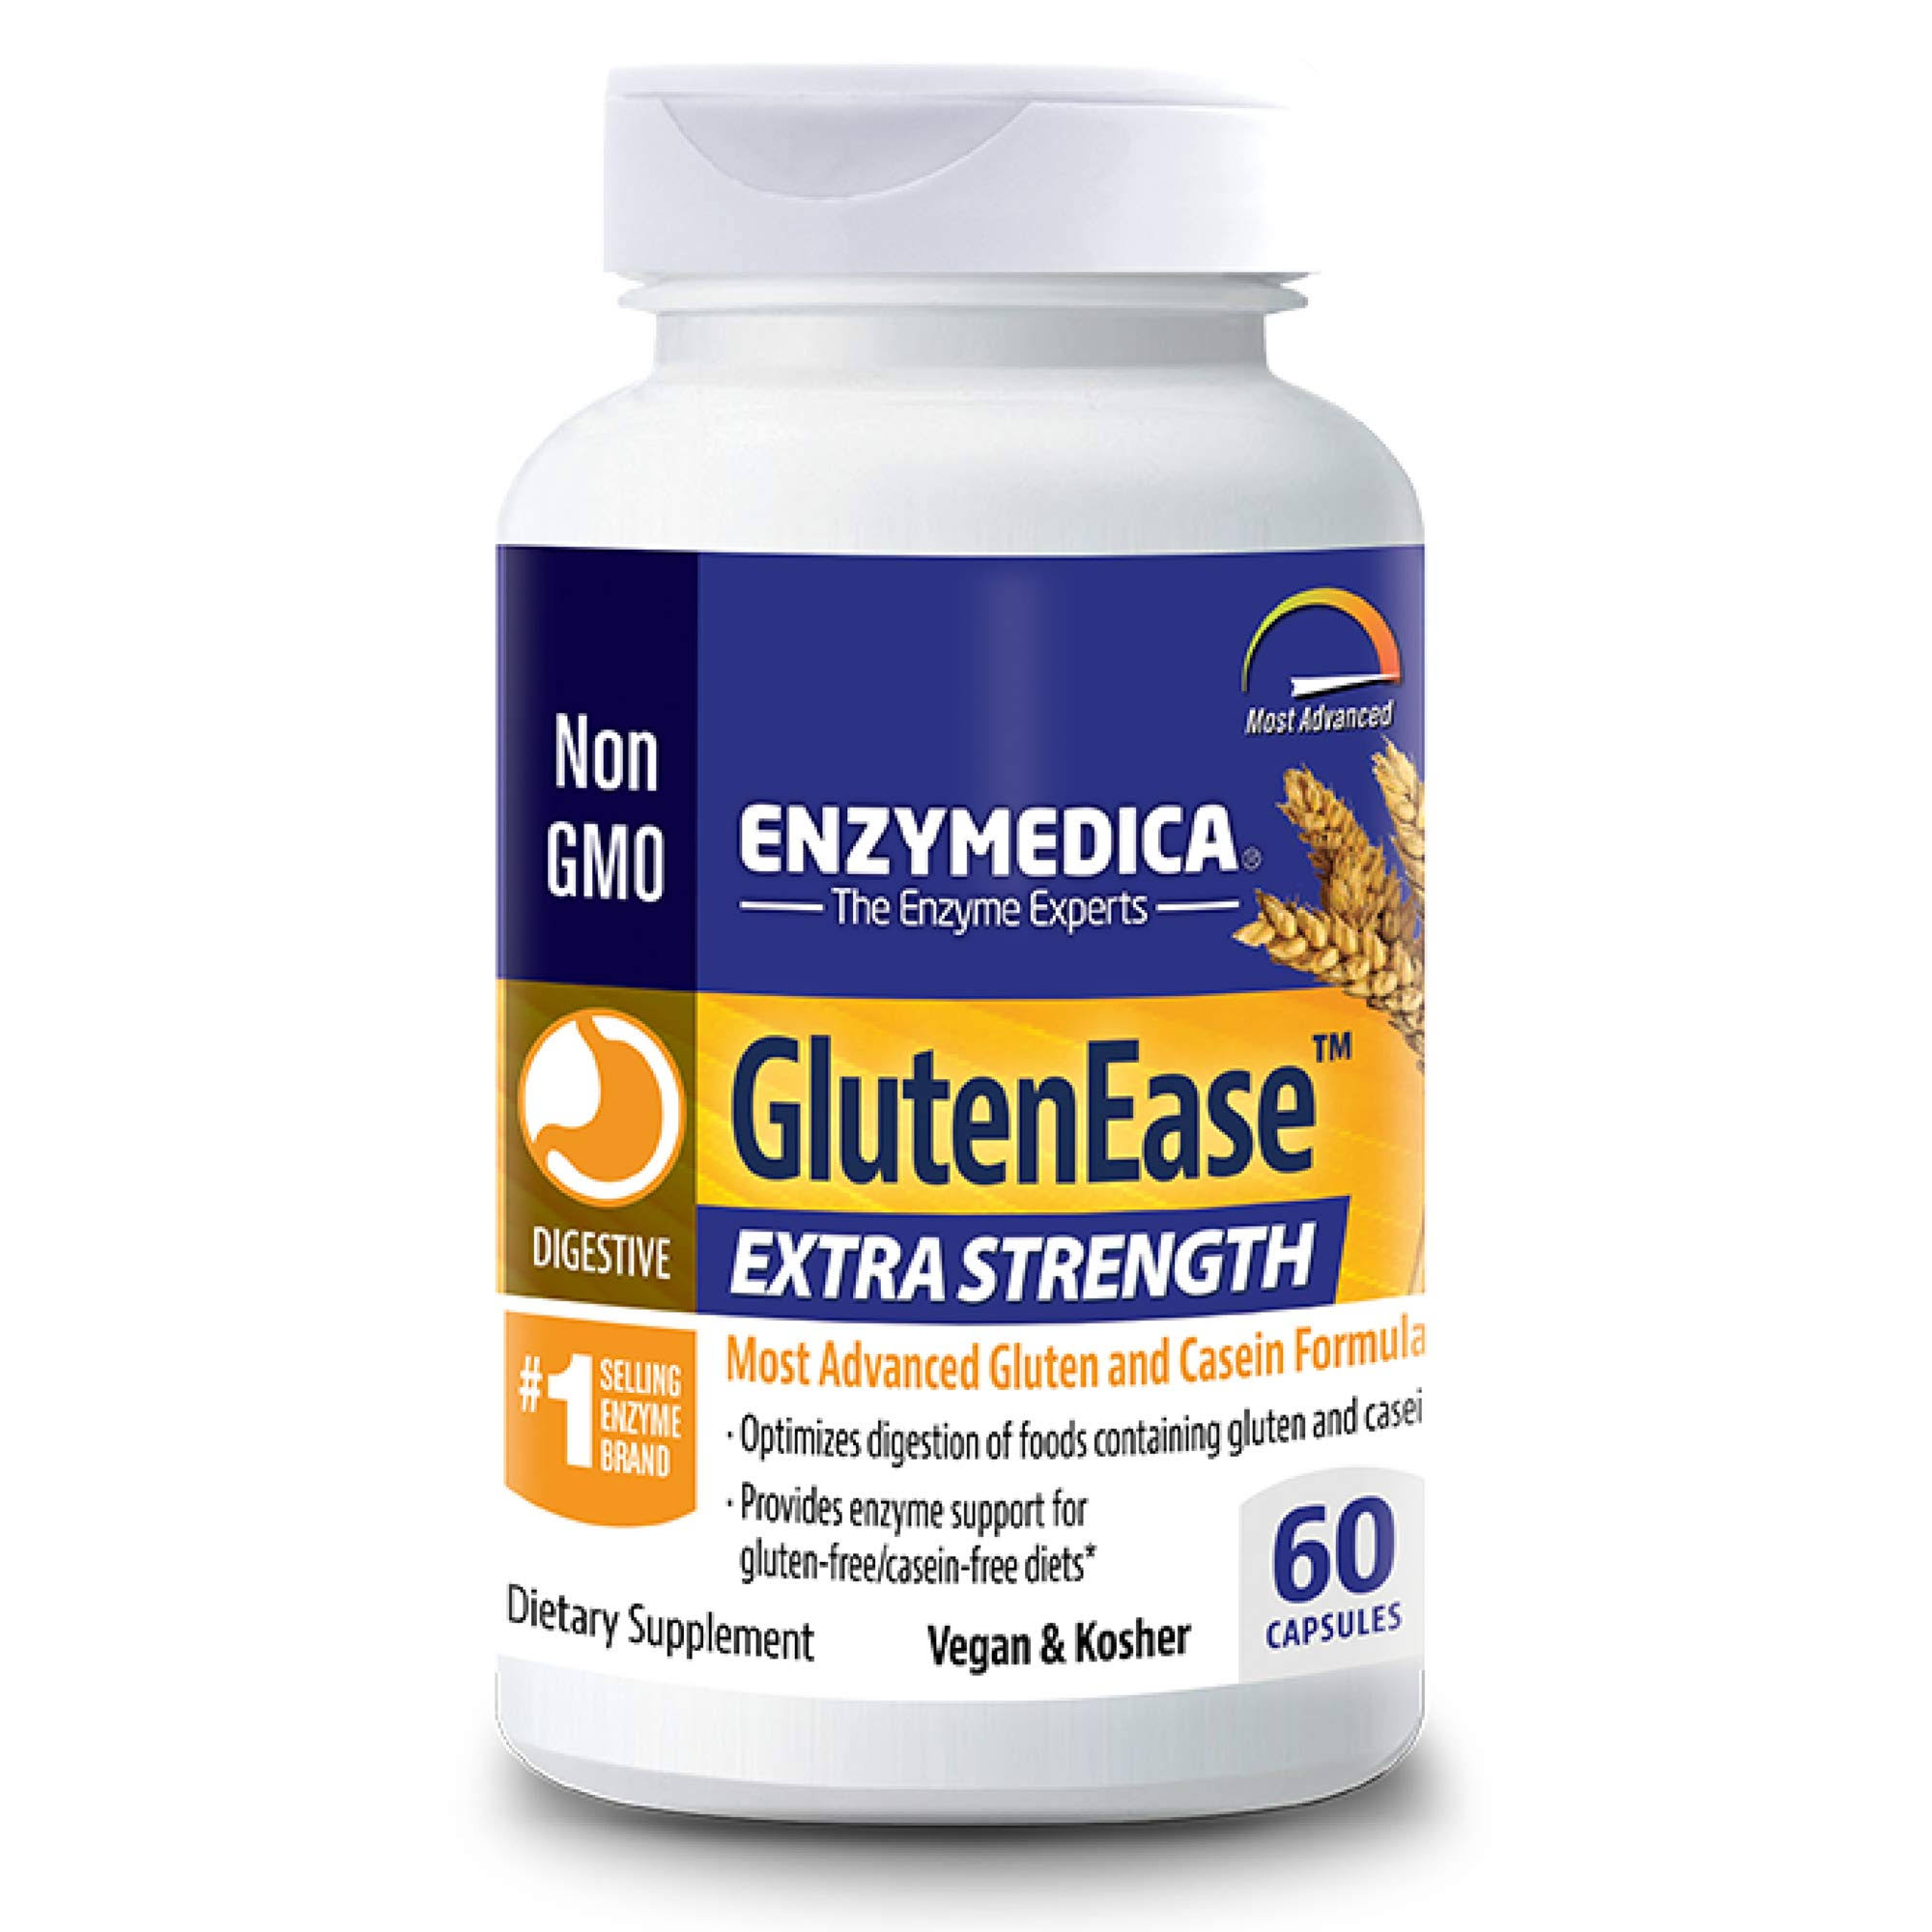 Enzymedica GlutenEase 2x Supplement - 60 Capsules